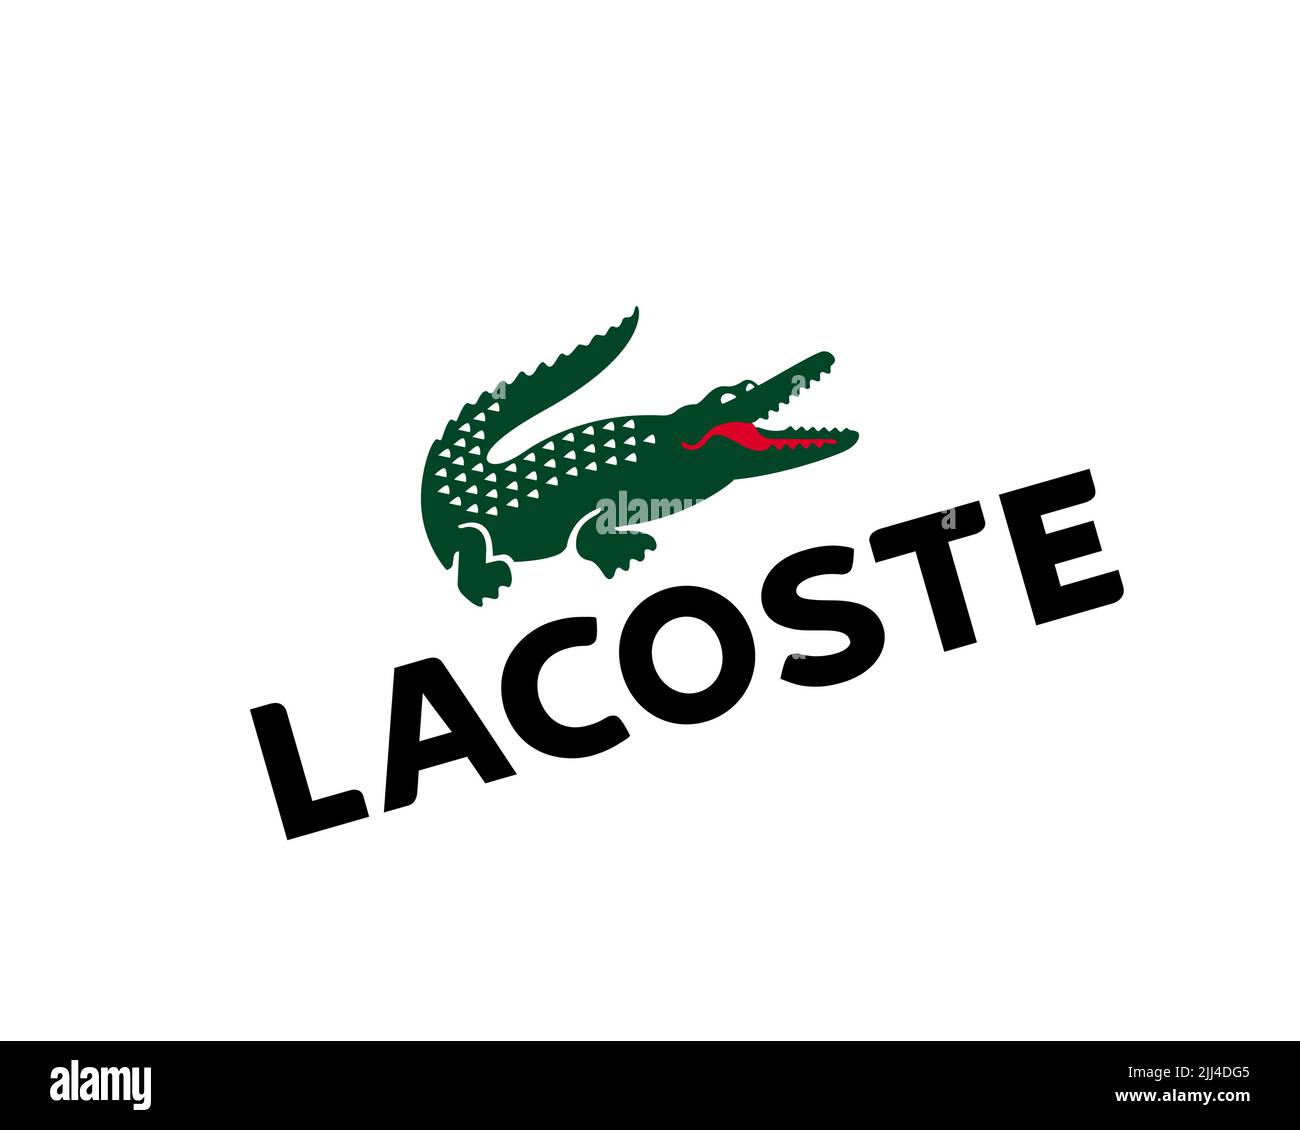 Lacoste logo Cut Out Stock Images & Pictures - Alamy